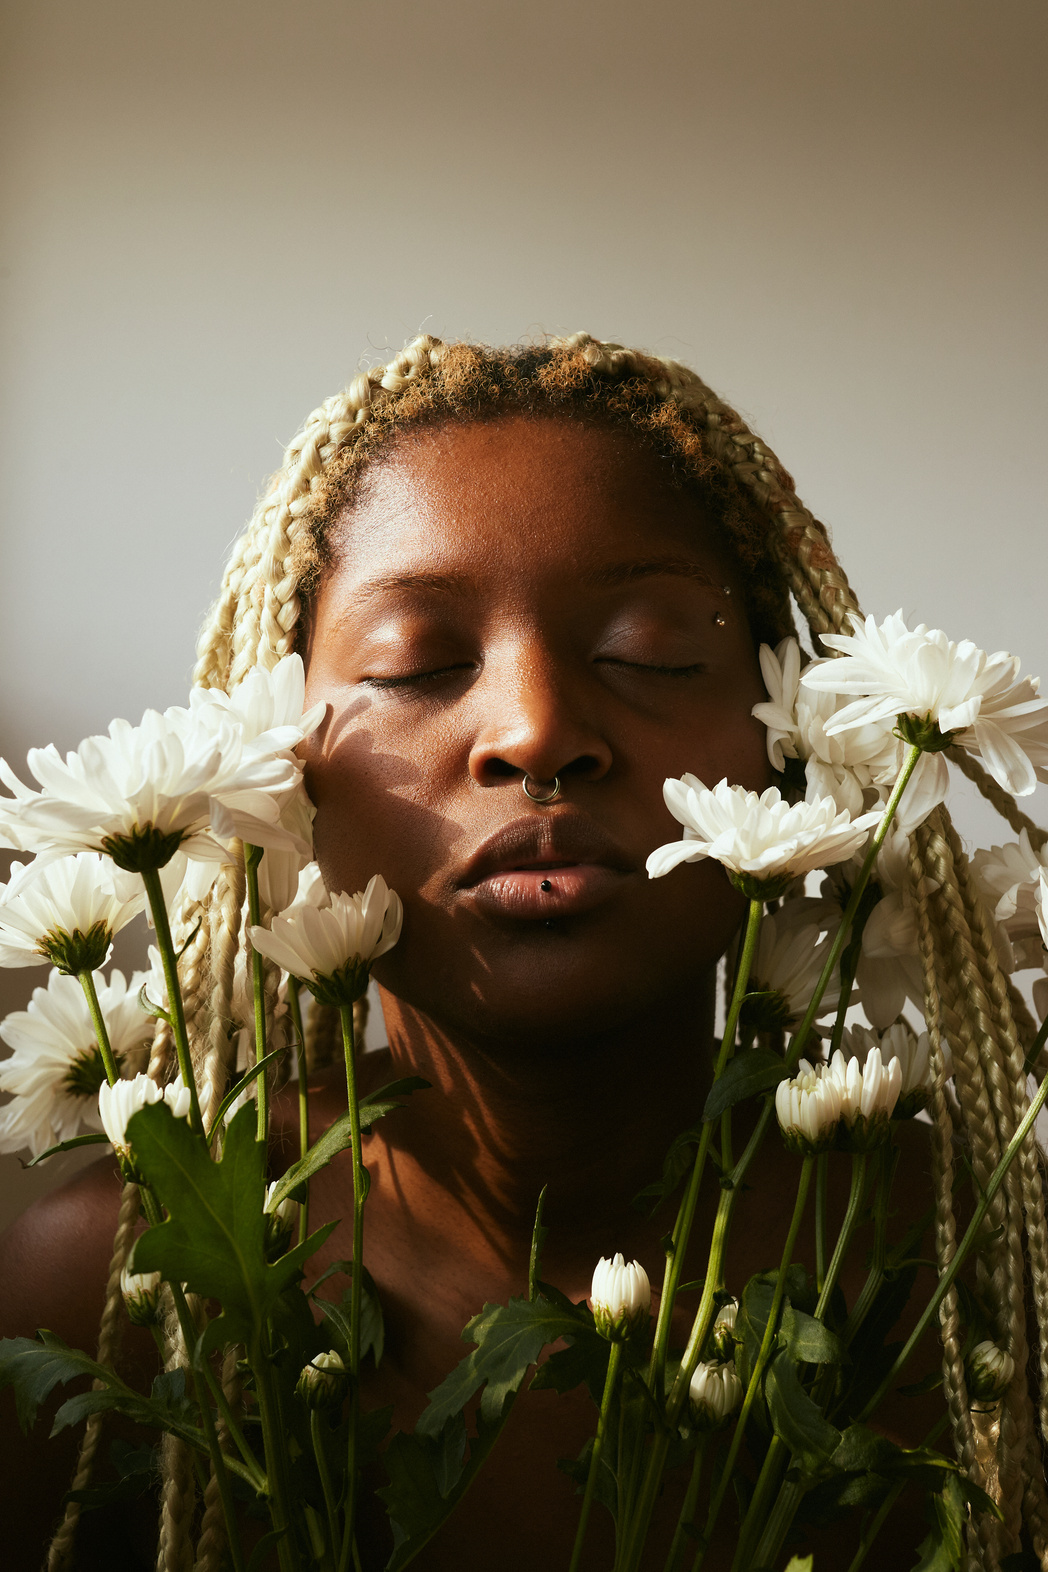 Portrait of Woman with Flowers and Dramatic Lighting